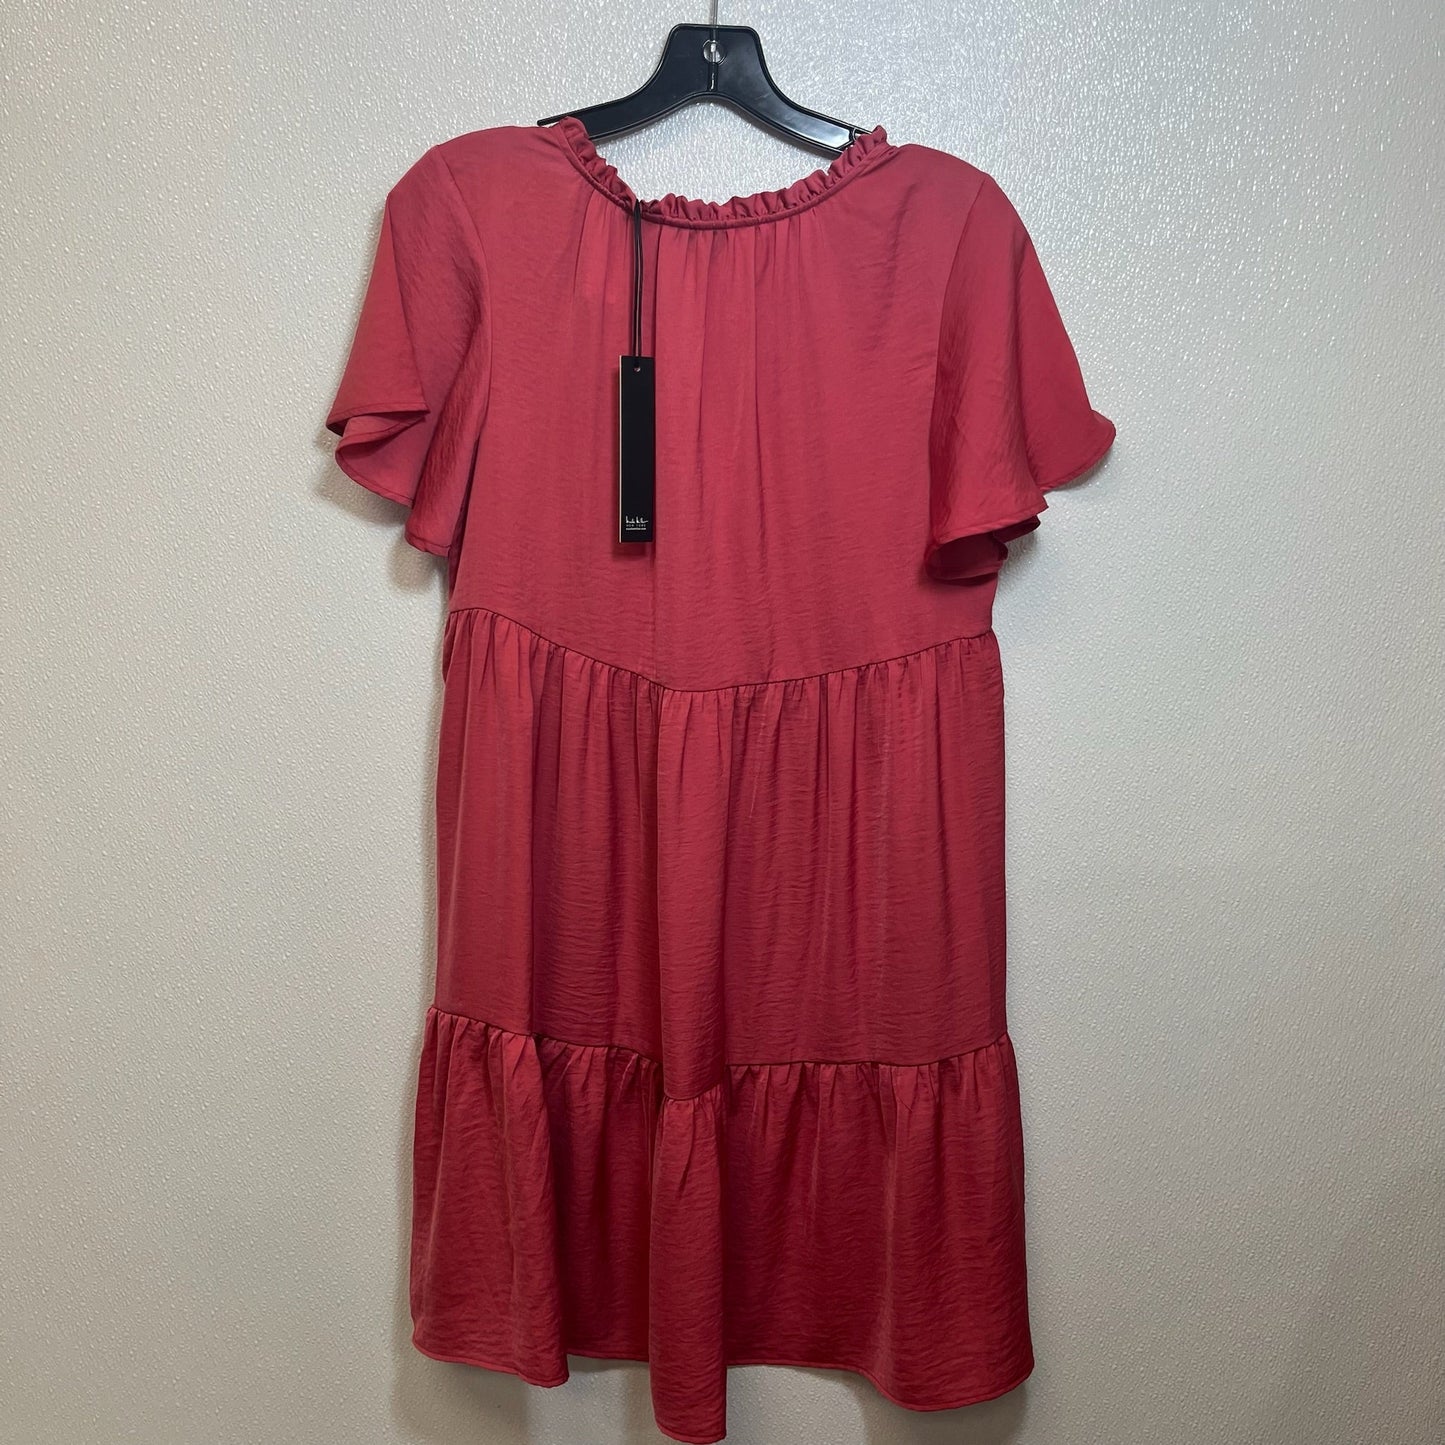 Dress Casual Short By Nicole Miller  Size: S